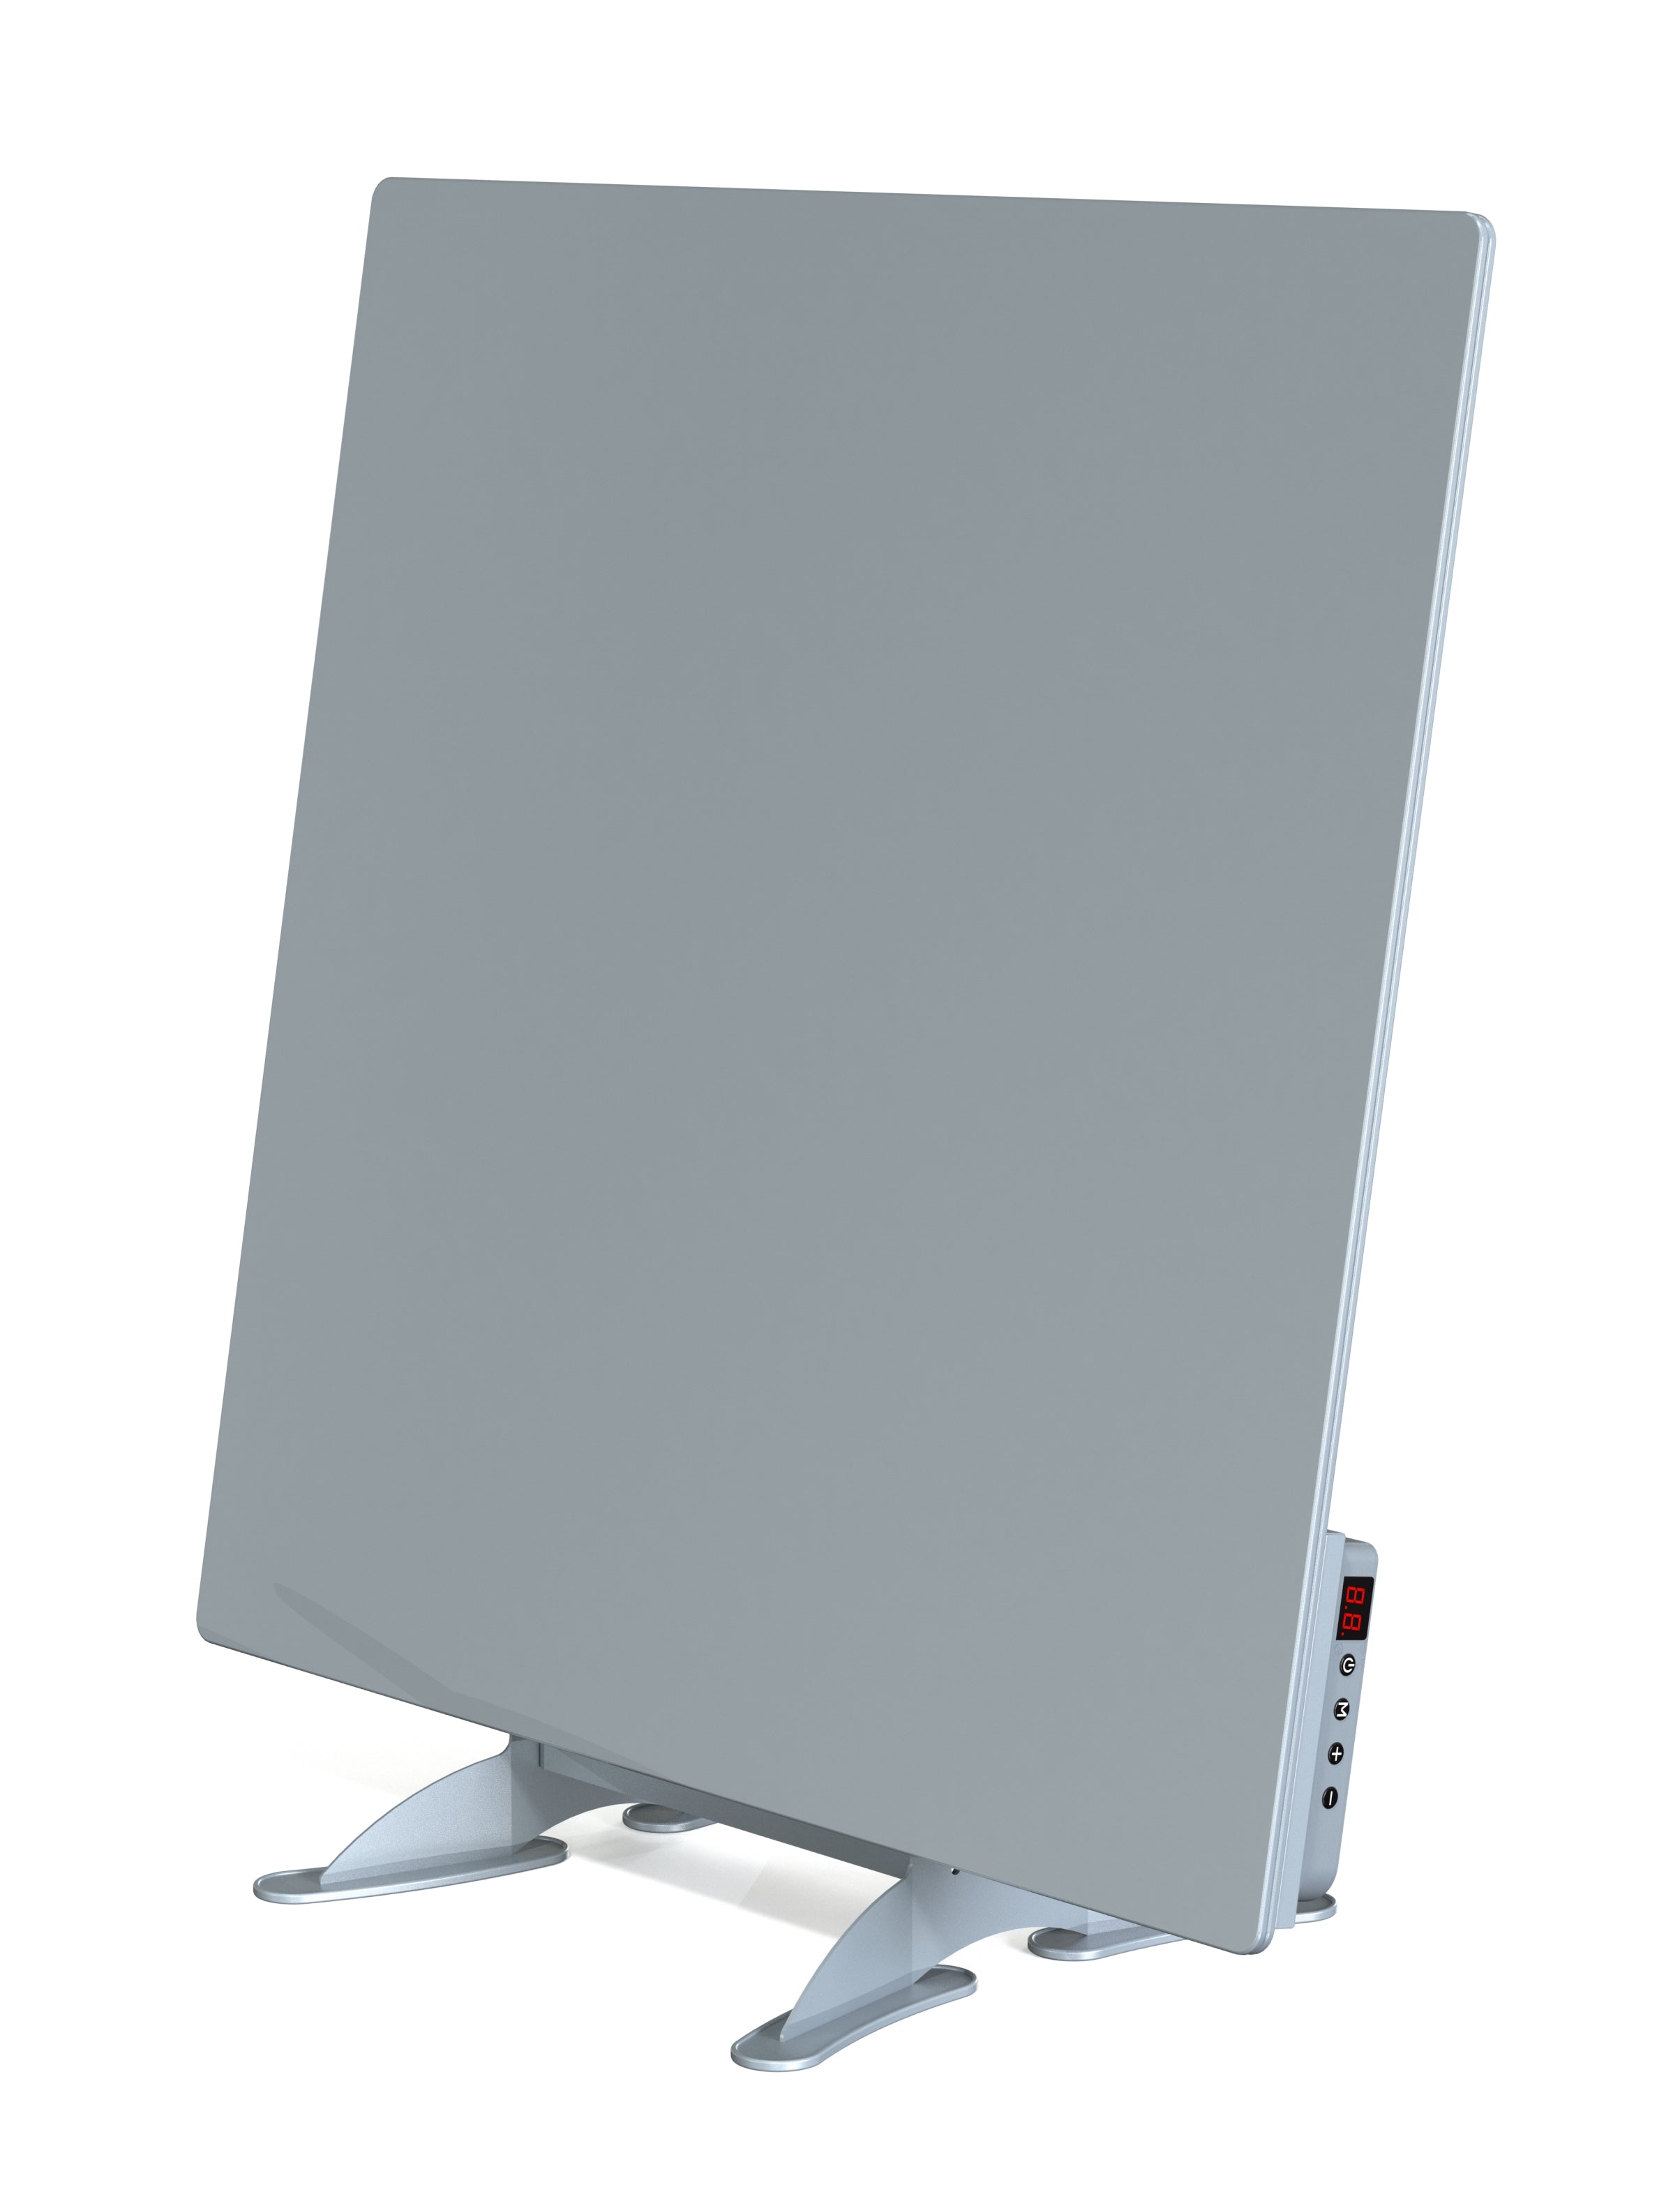 Far Infrared Heater - "Lavender Range" Smart WiFi control or ON/OFF models. Glass Smart infrared heating panels. Grey. 800-400Watts